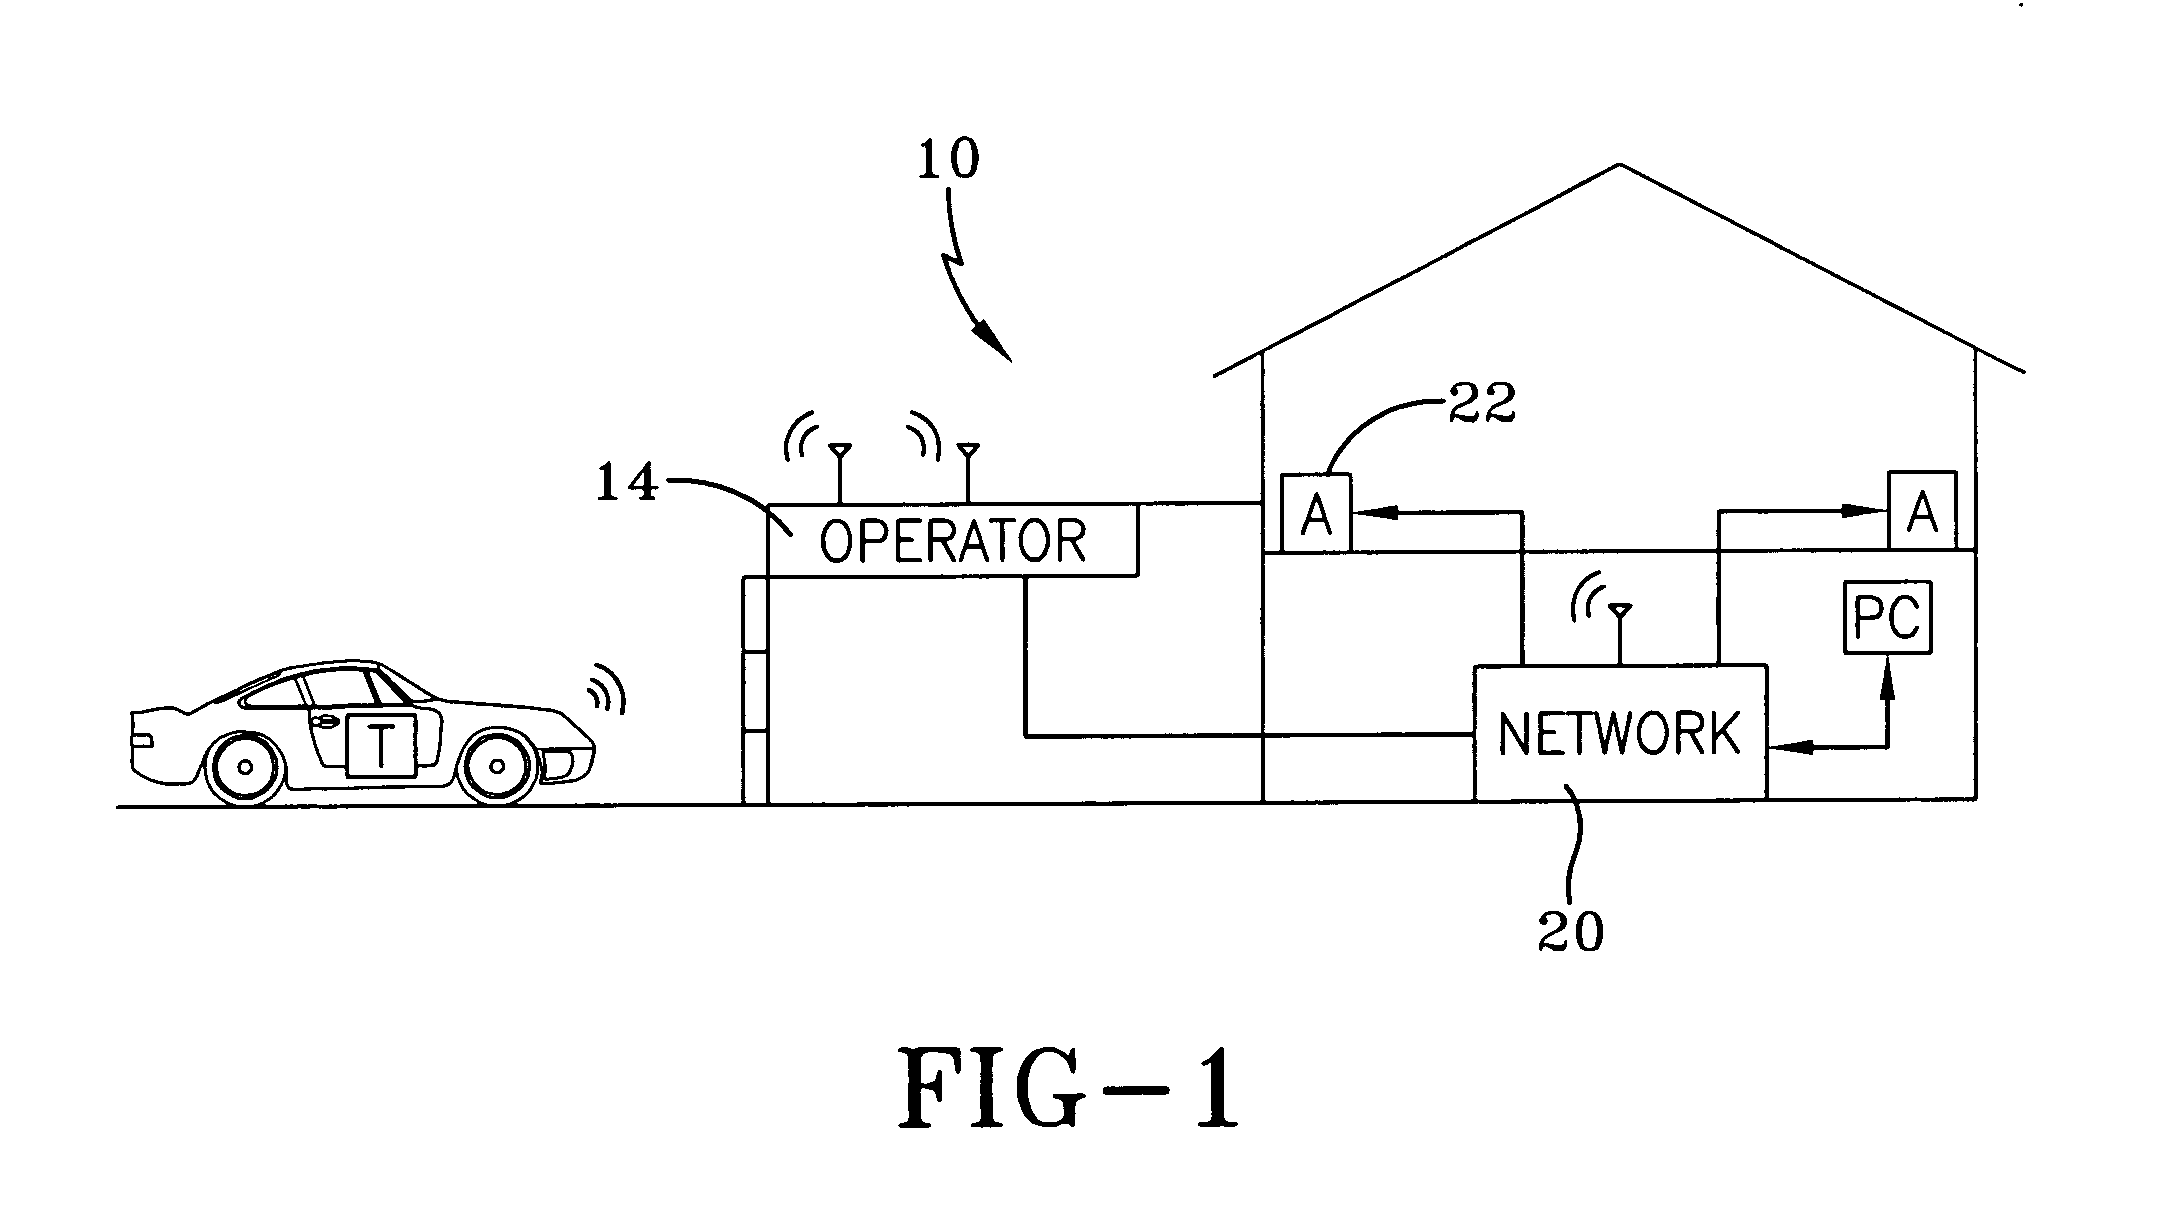 Networked movable barrier operator system